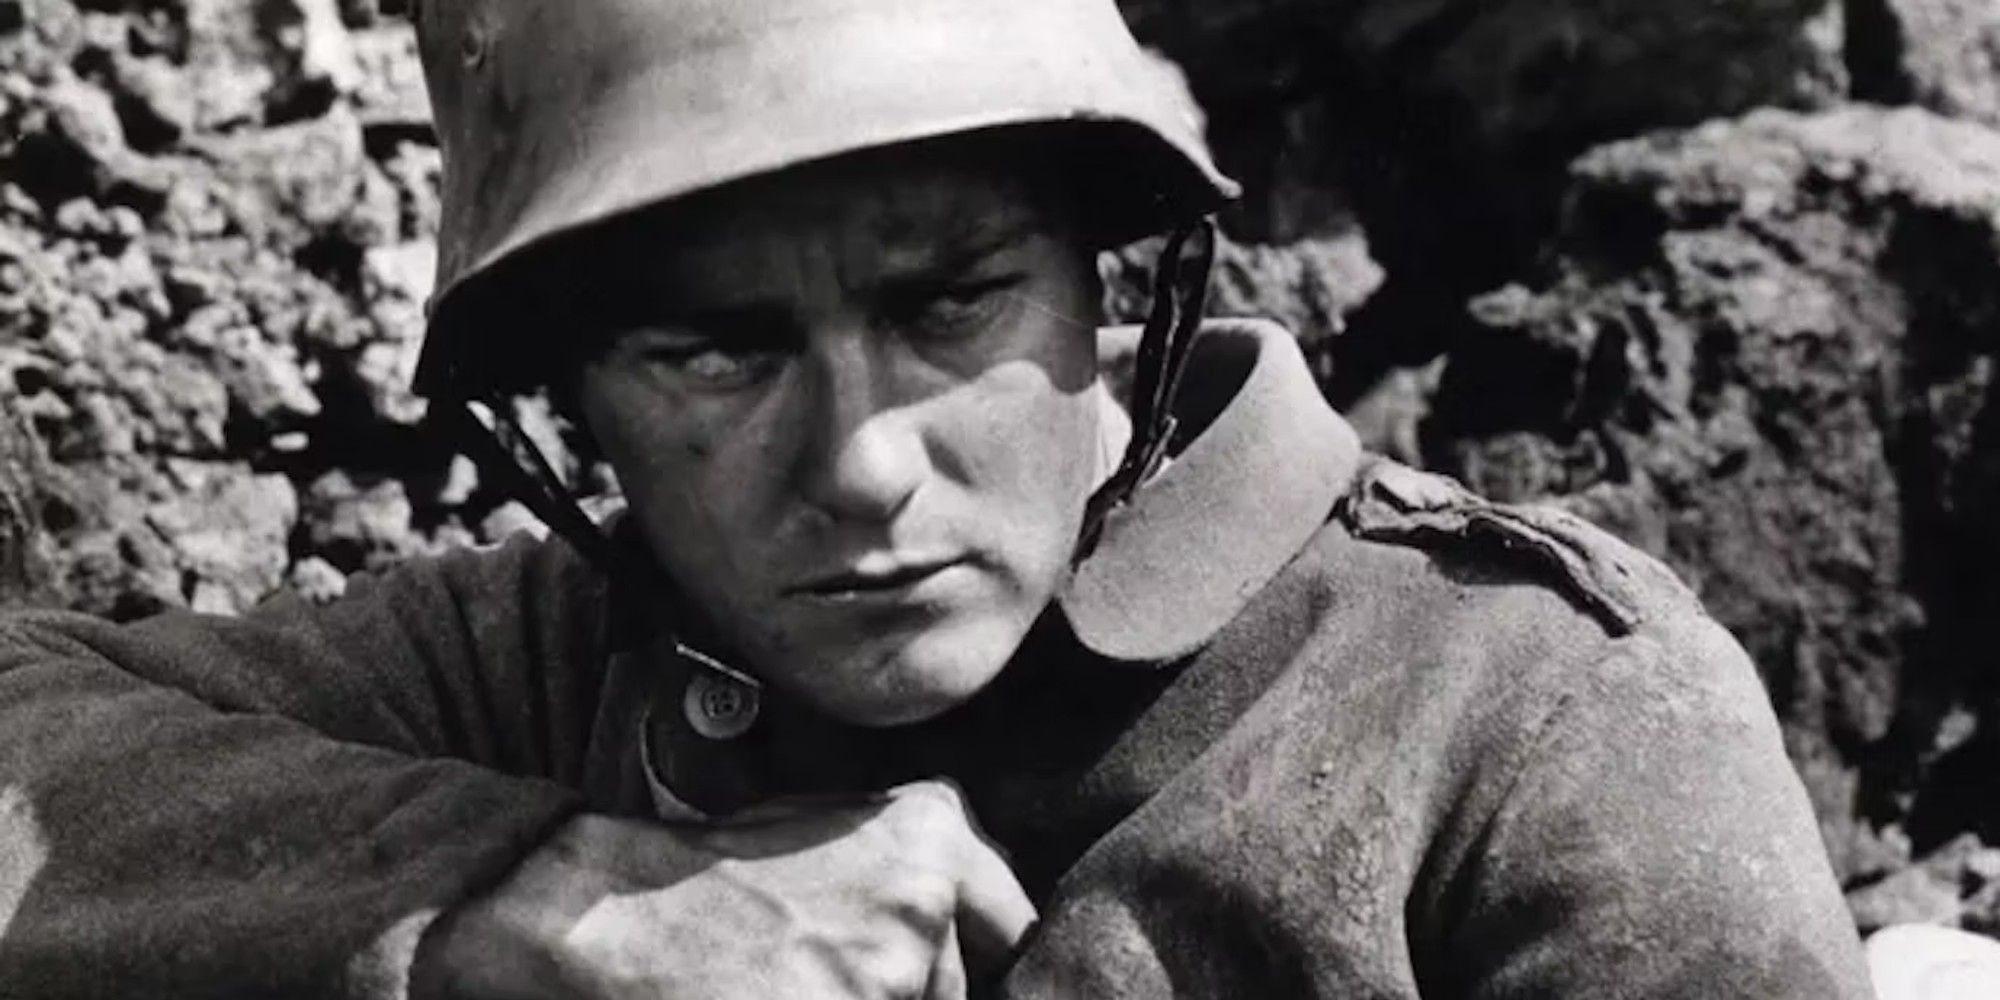 Lew Ayres as Paul Bäumer shooting a gun in the original All Quiet on the Western Front movie from 1930.